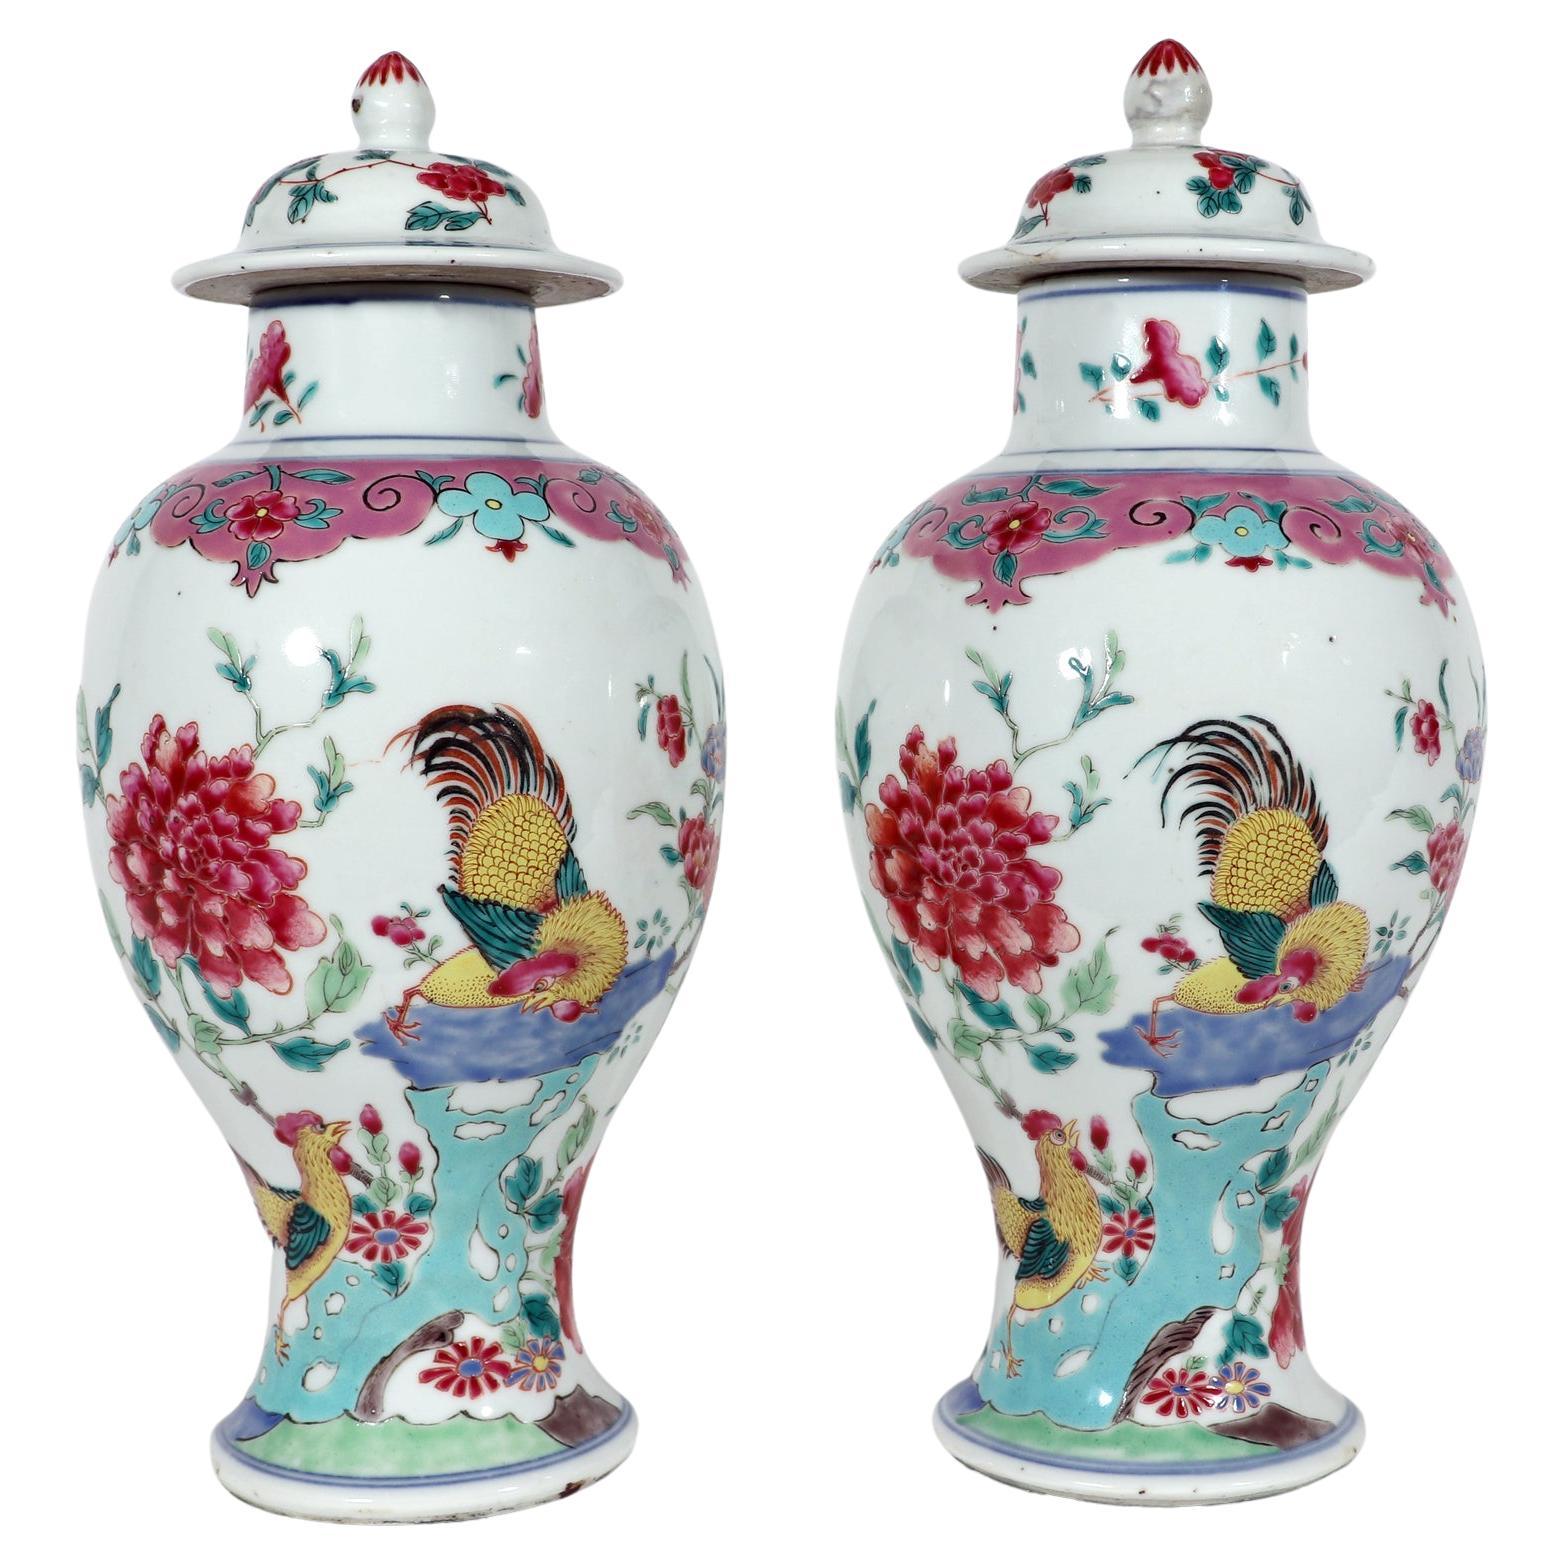 Chinese Export Porcelain Baluster Famille Rose Vases With Cockerels